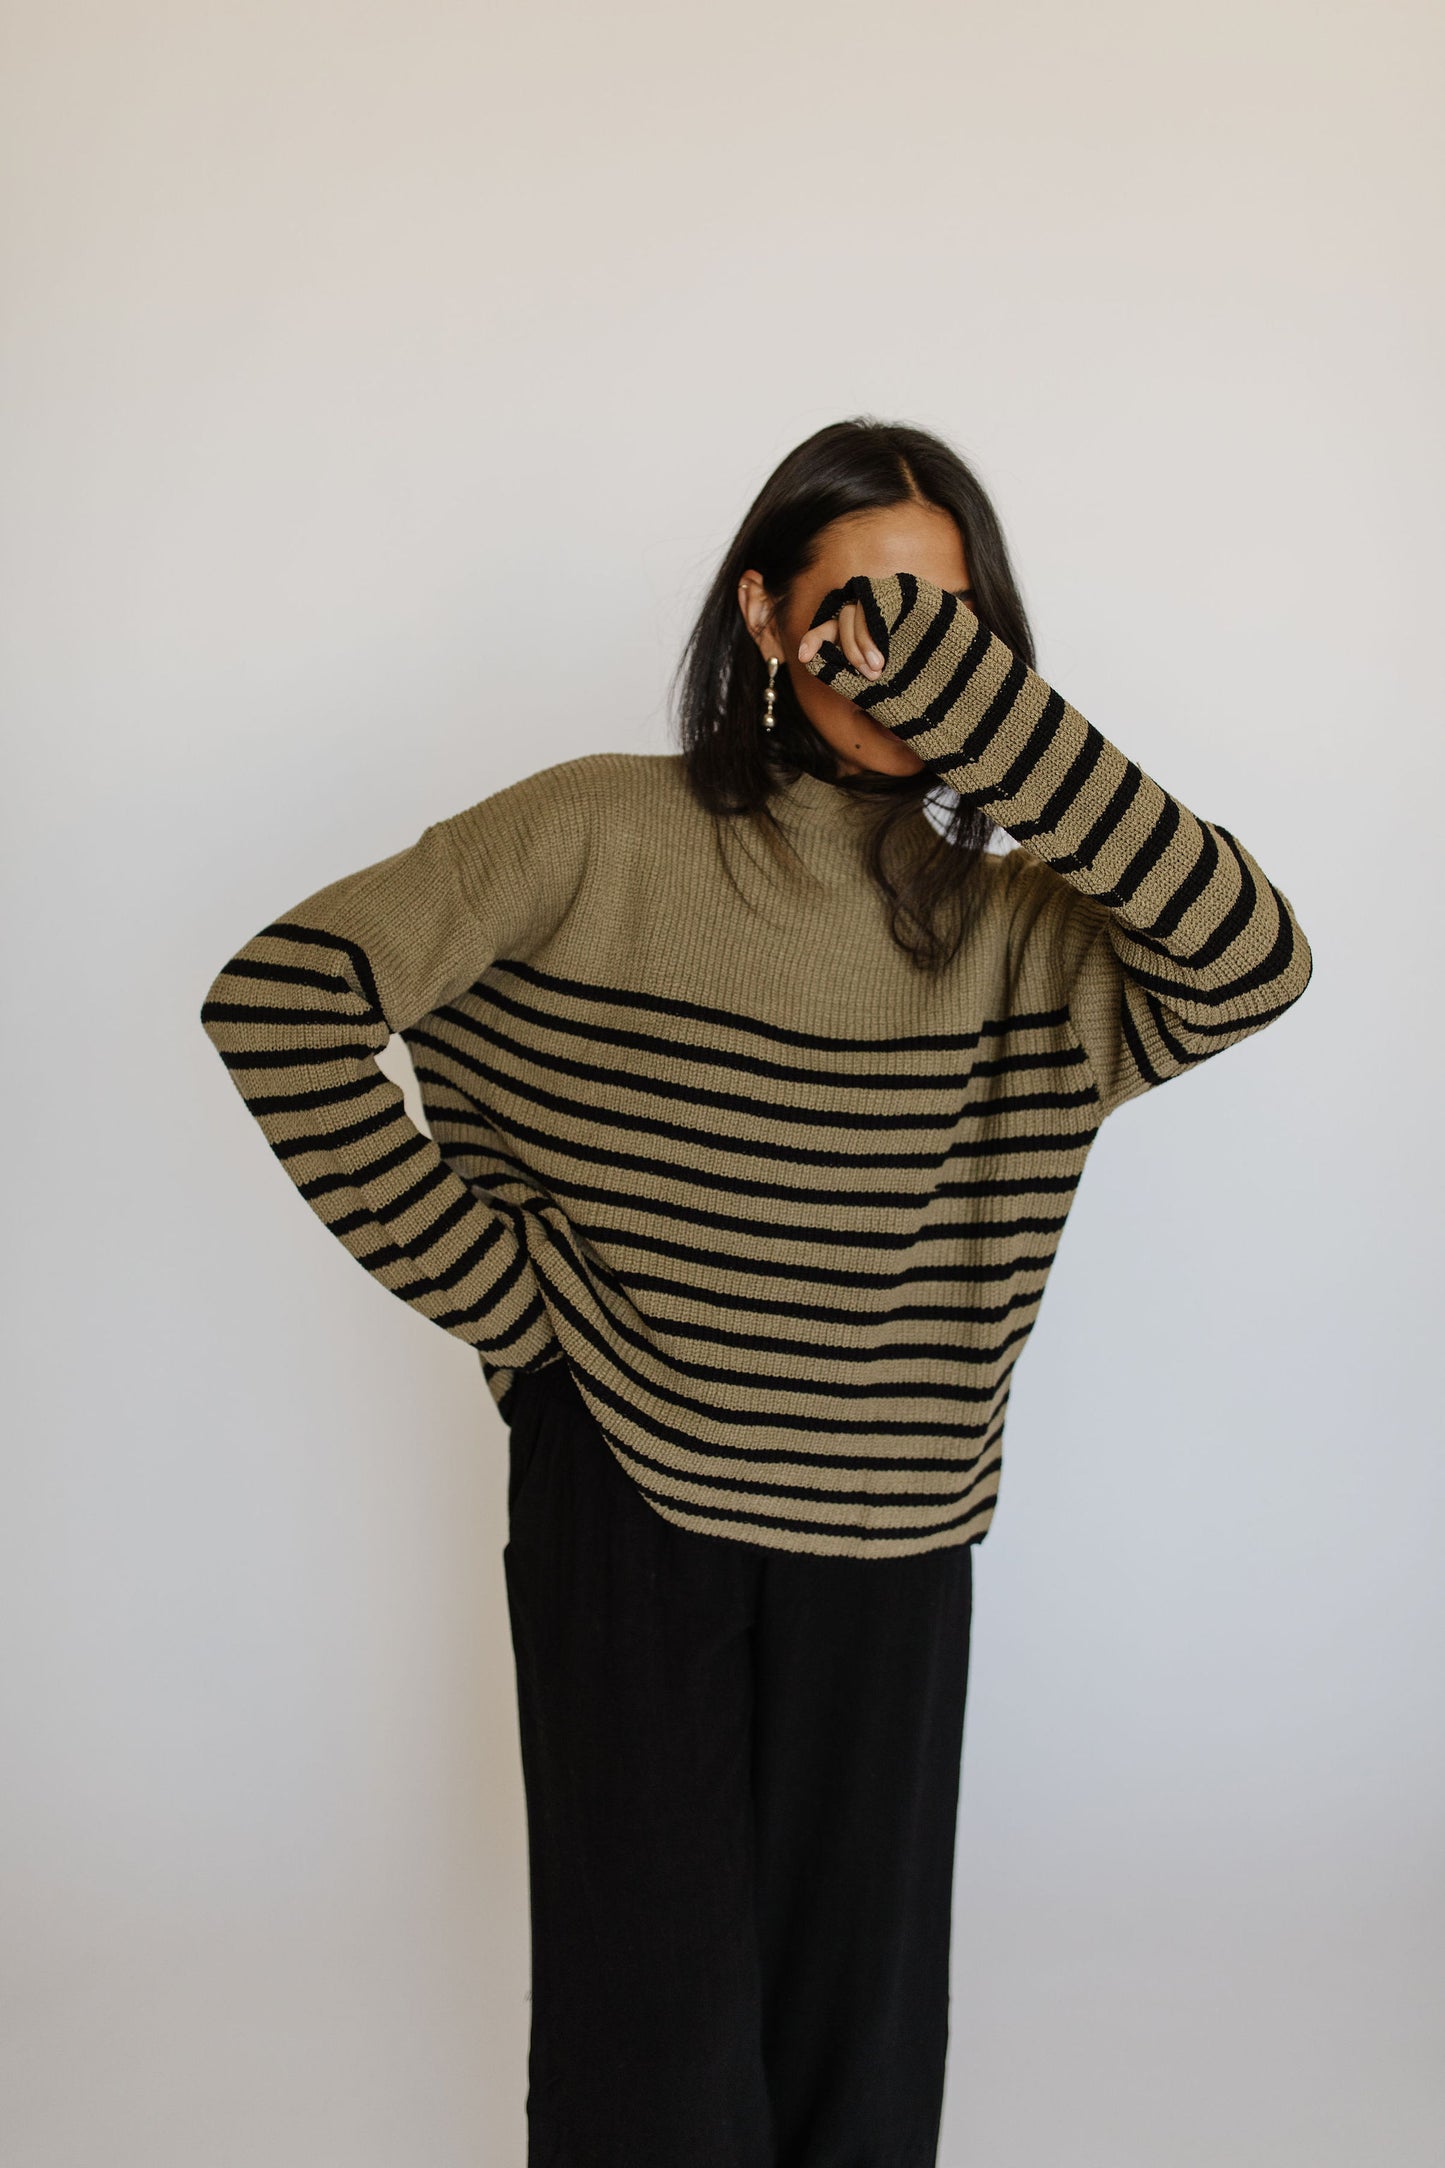 The Eyre Sweater - Striped